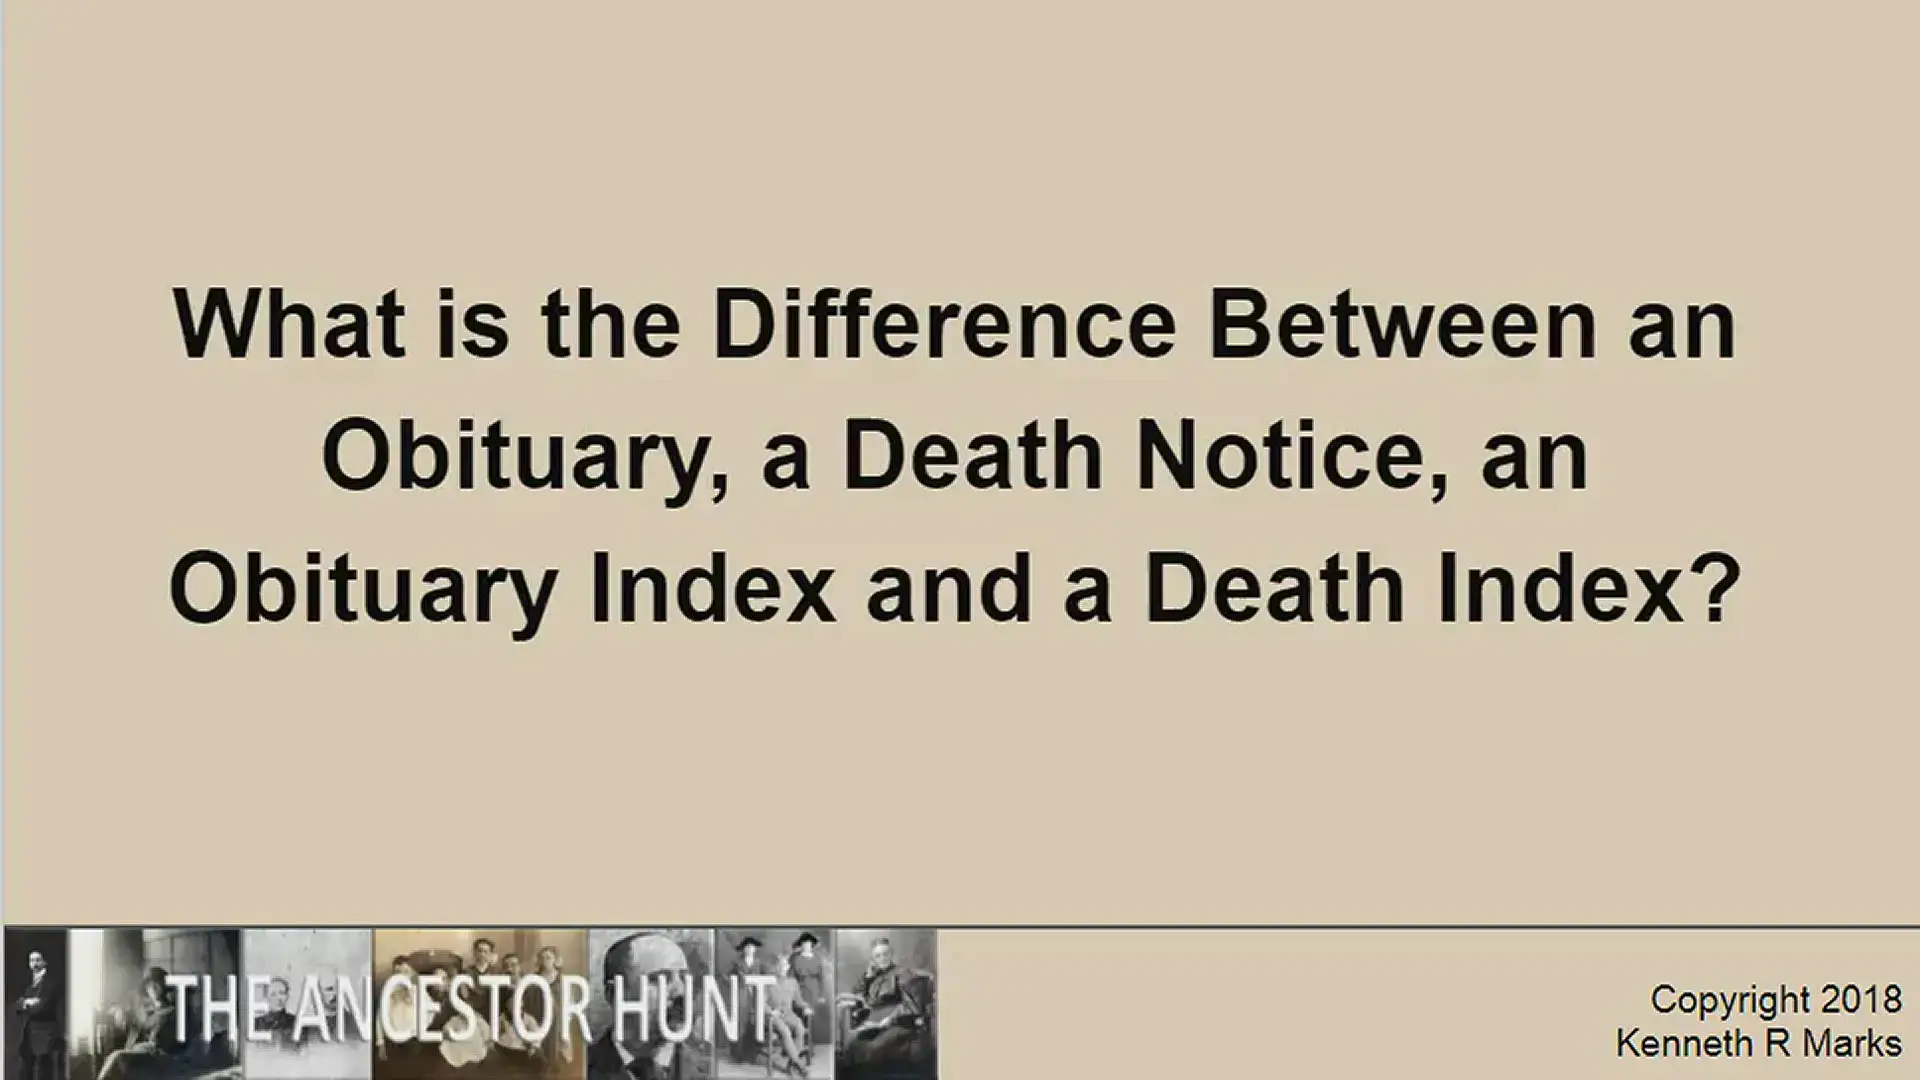 'Video thumbnail for What is the Difference Between an Obituary, a Death Notice, an Obituary Index and a Death Index? '